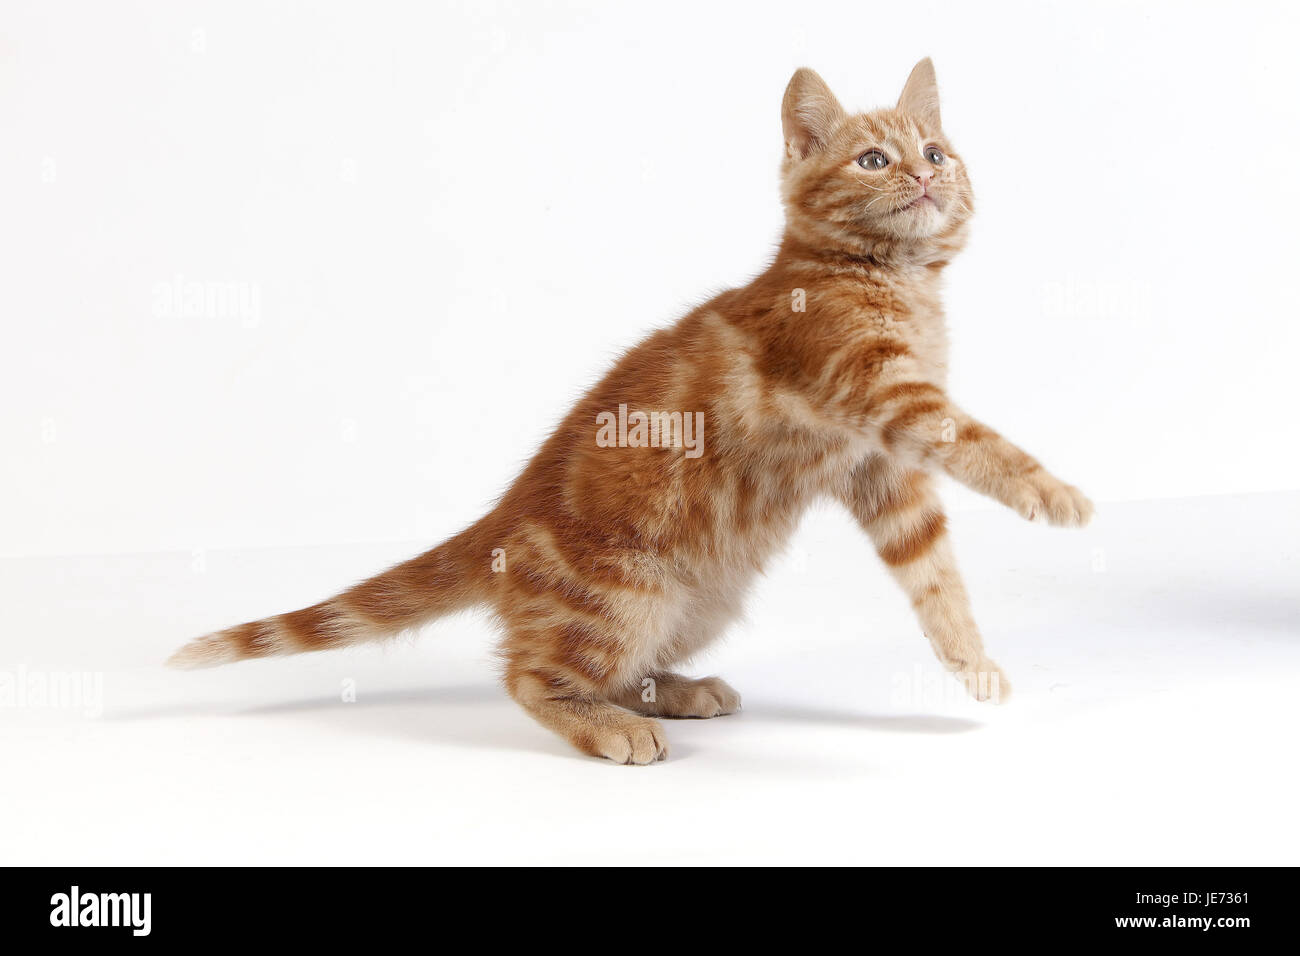 Red house cat, play, white background, Stock Photo